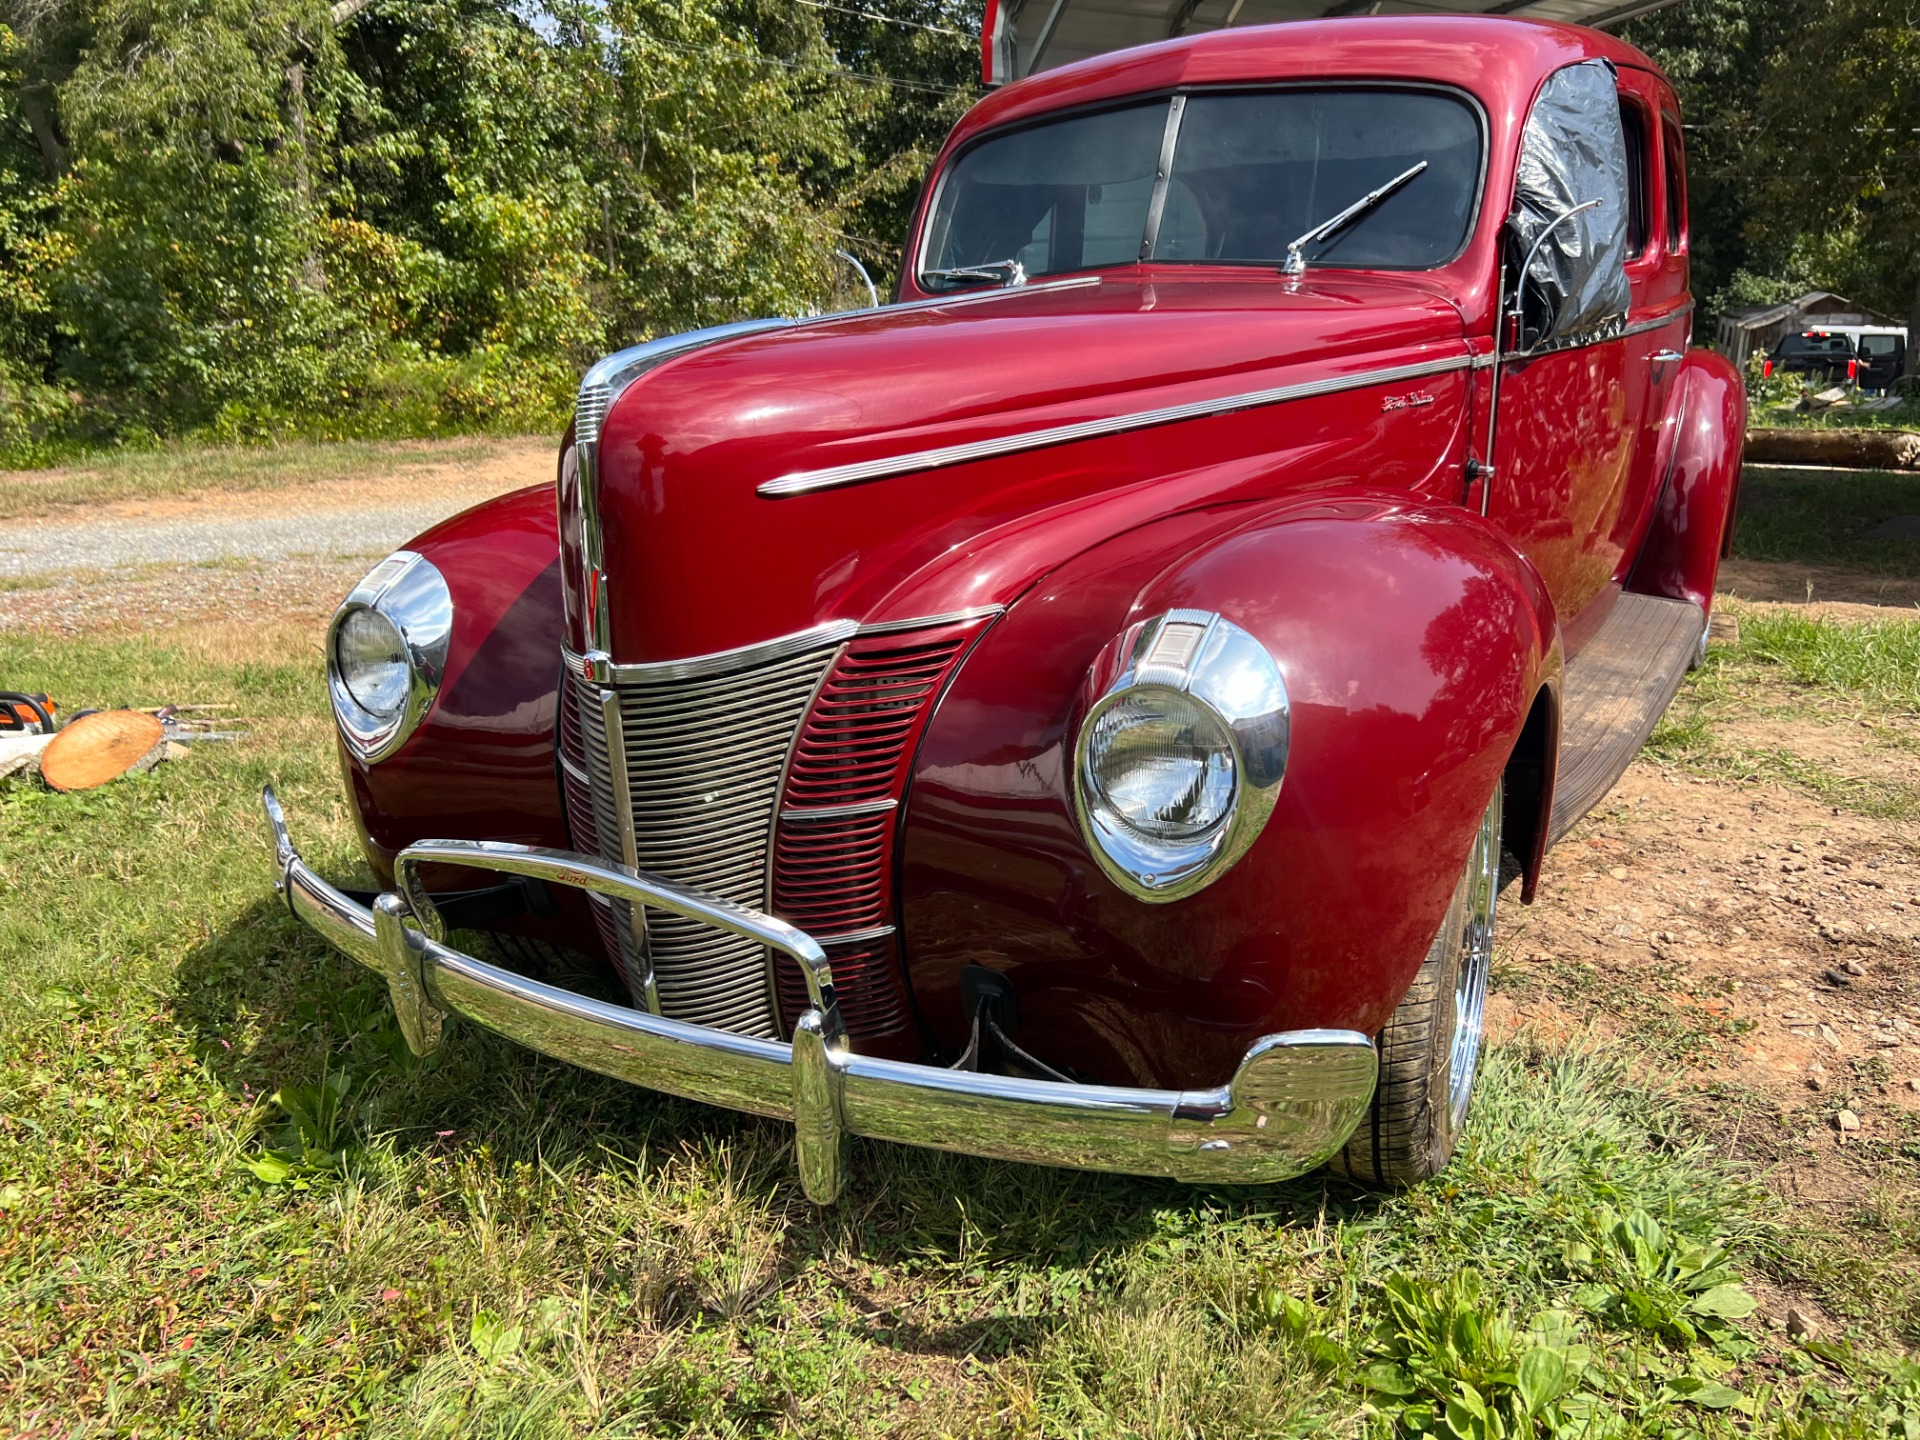 Used 1940 Ford Deluxe Coupe  256 , For Sale $16000, Call Us: (704) 996-3735